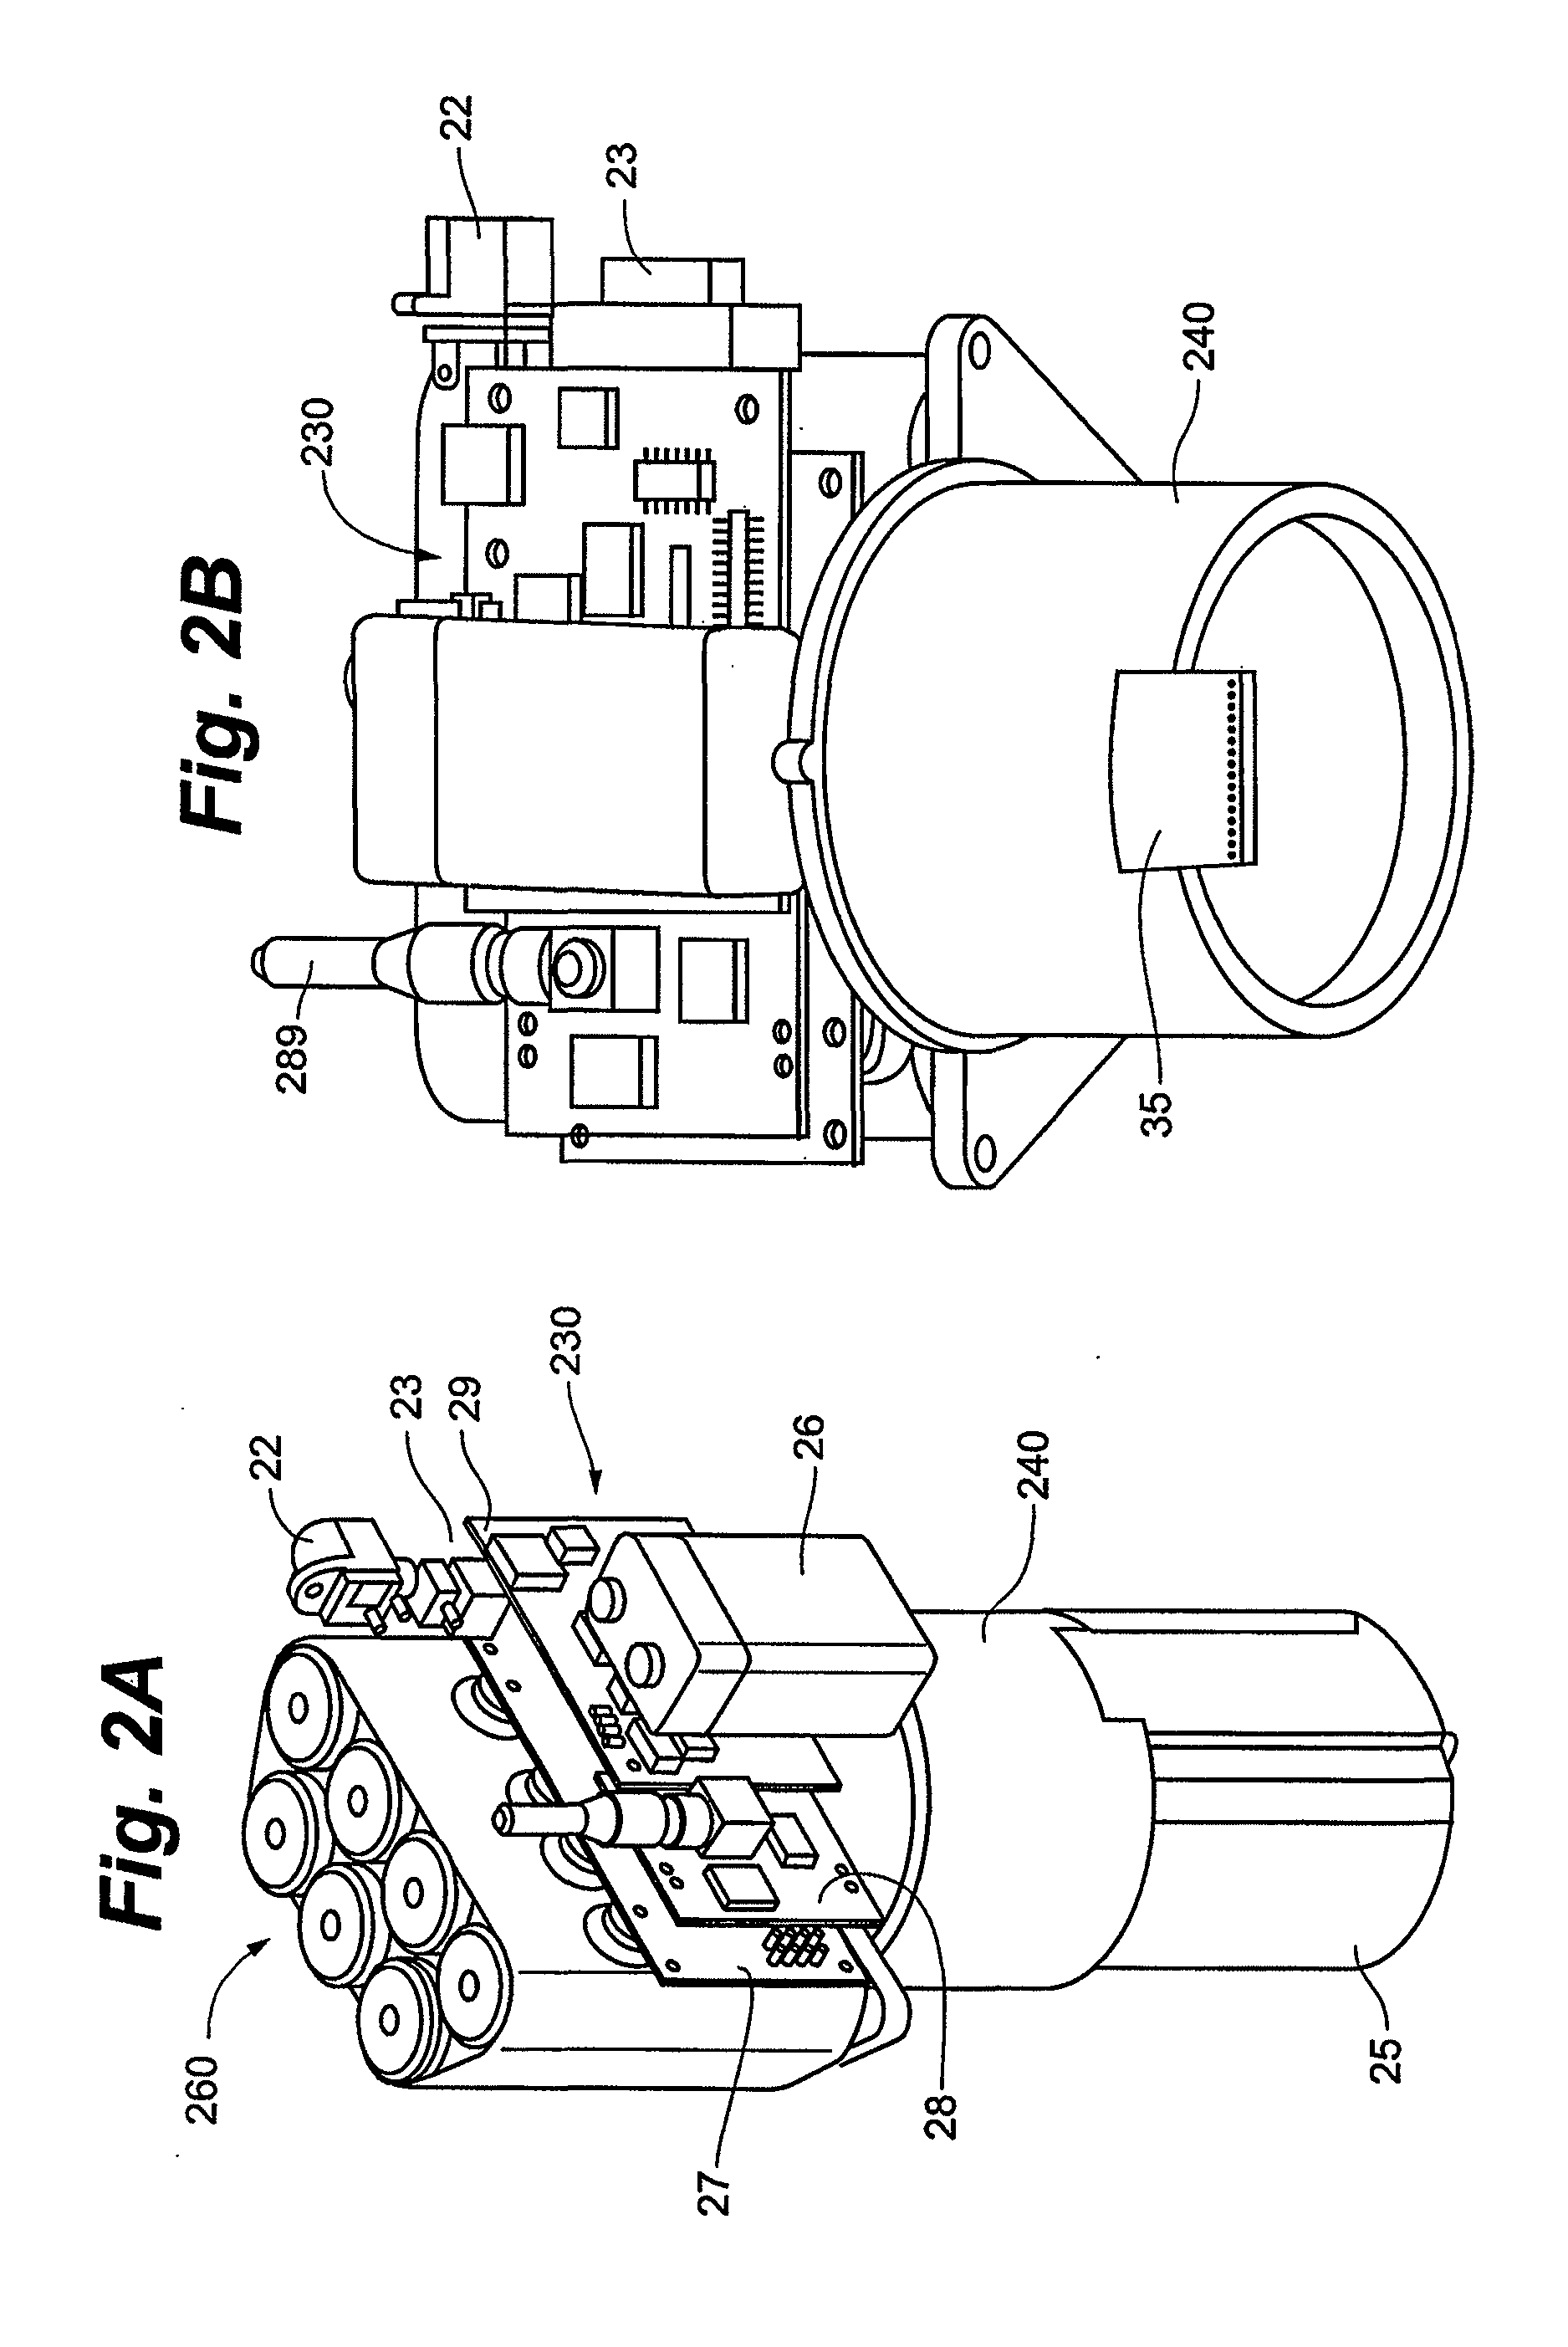 Novel assemblies and methods for processing workpieces in ram-driven presses